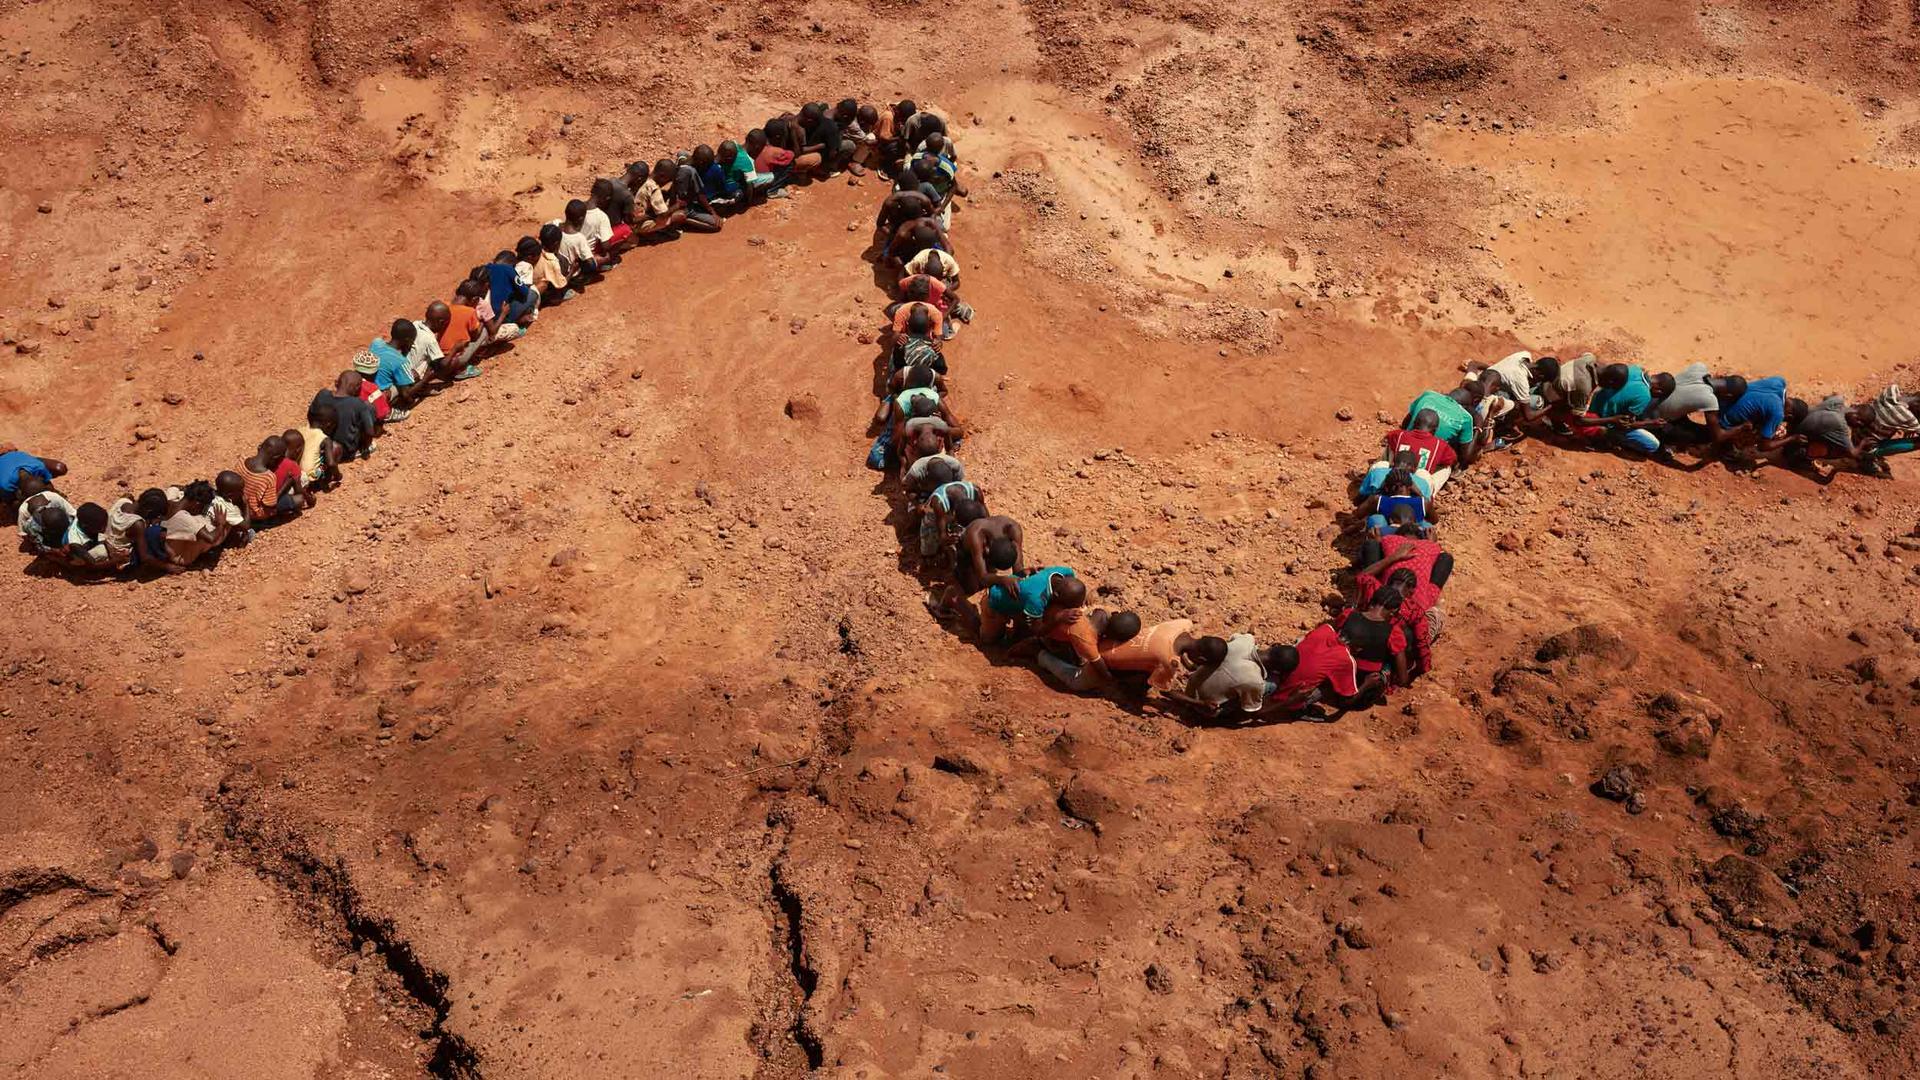 People form a line like a snake on the bed of a dry riverbed